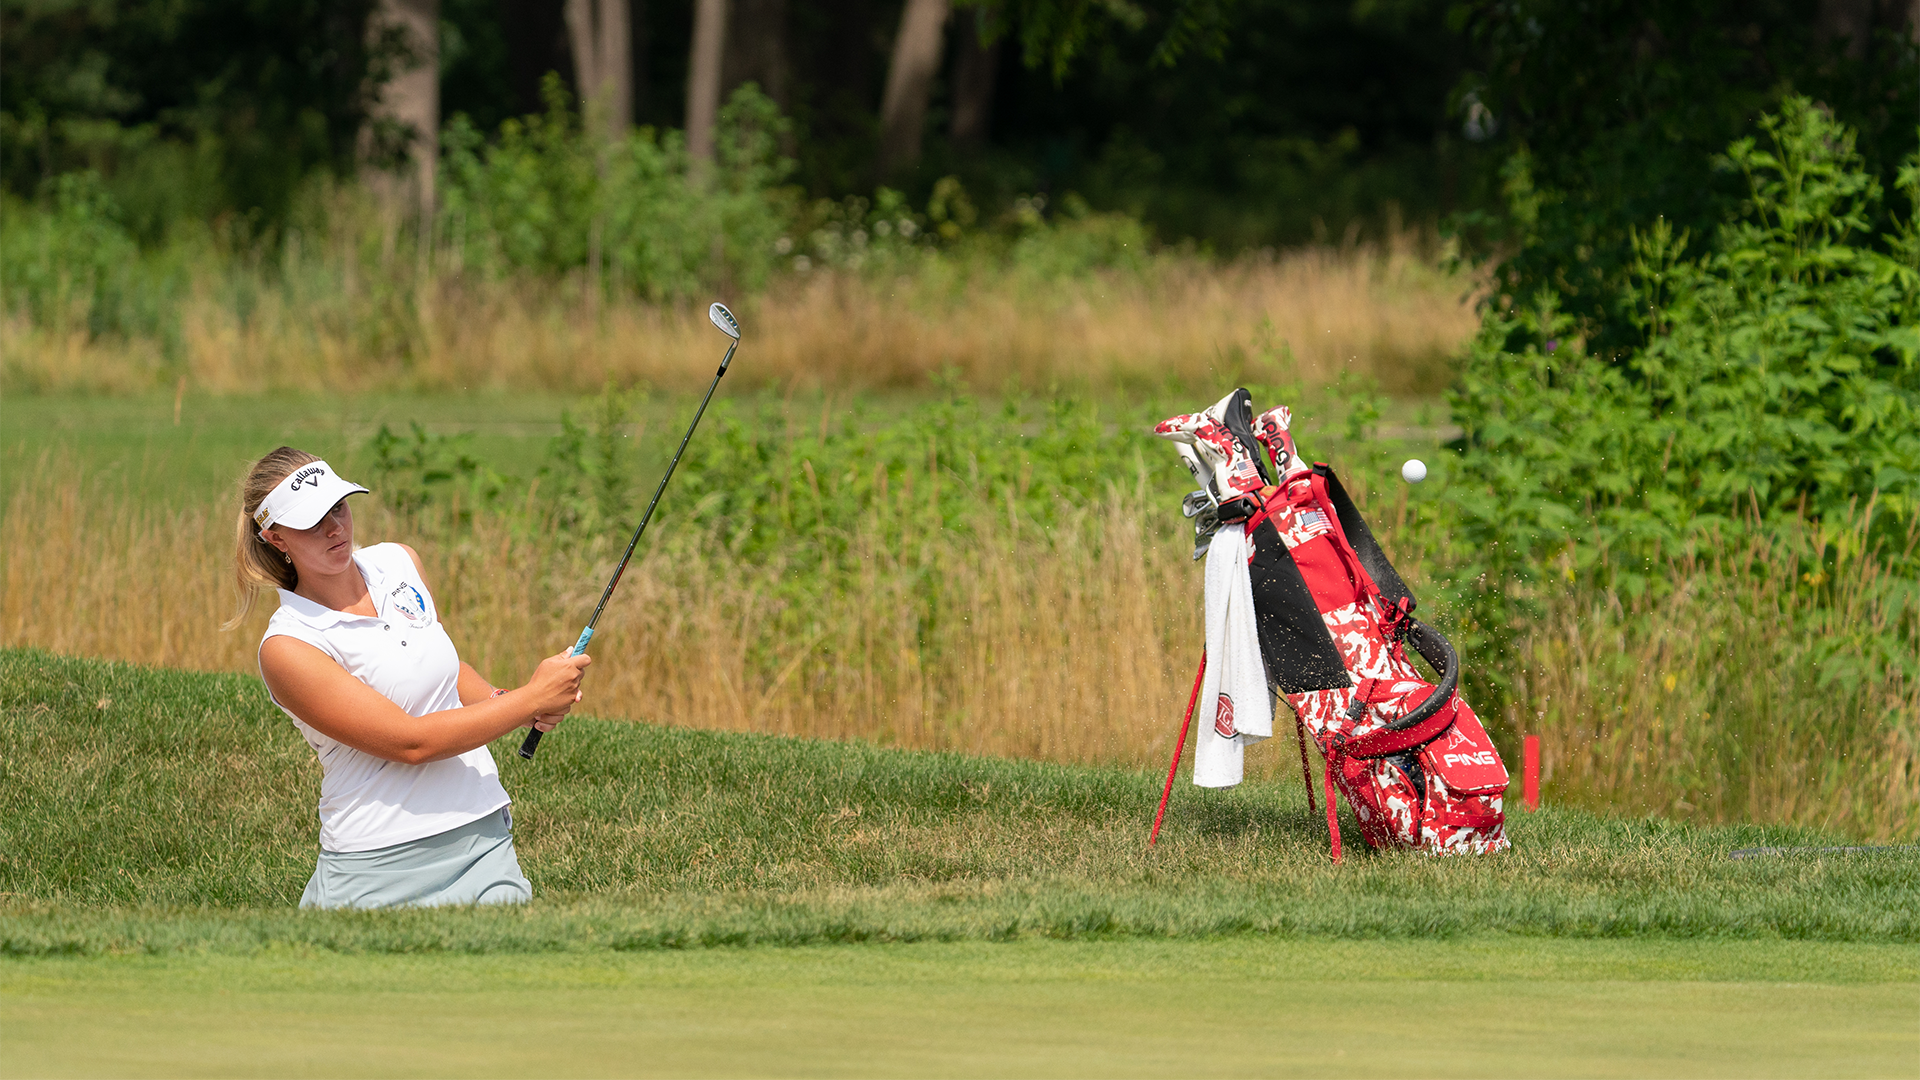 Kaitlyn Schroeder hits her shot from a bunker on the eighth hole during the second round for the 46th Boys and Girls Junior PGA Championship held at Cog Hill Golf & Country Club on August 3, 2022 in Lemont, Illinois. (Photo by Hailey Garrett/PGA of America)